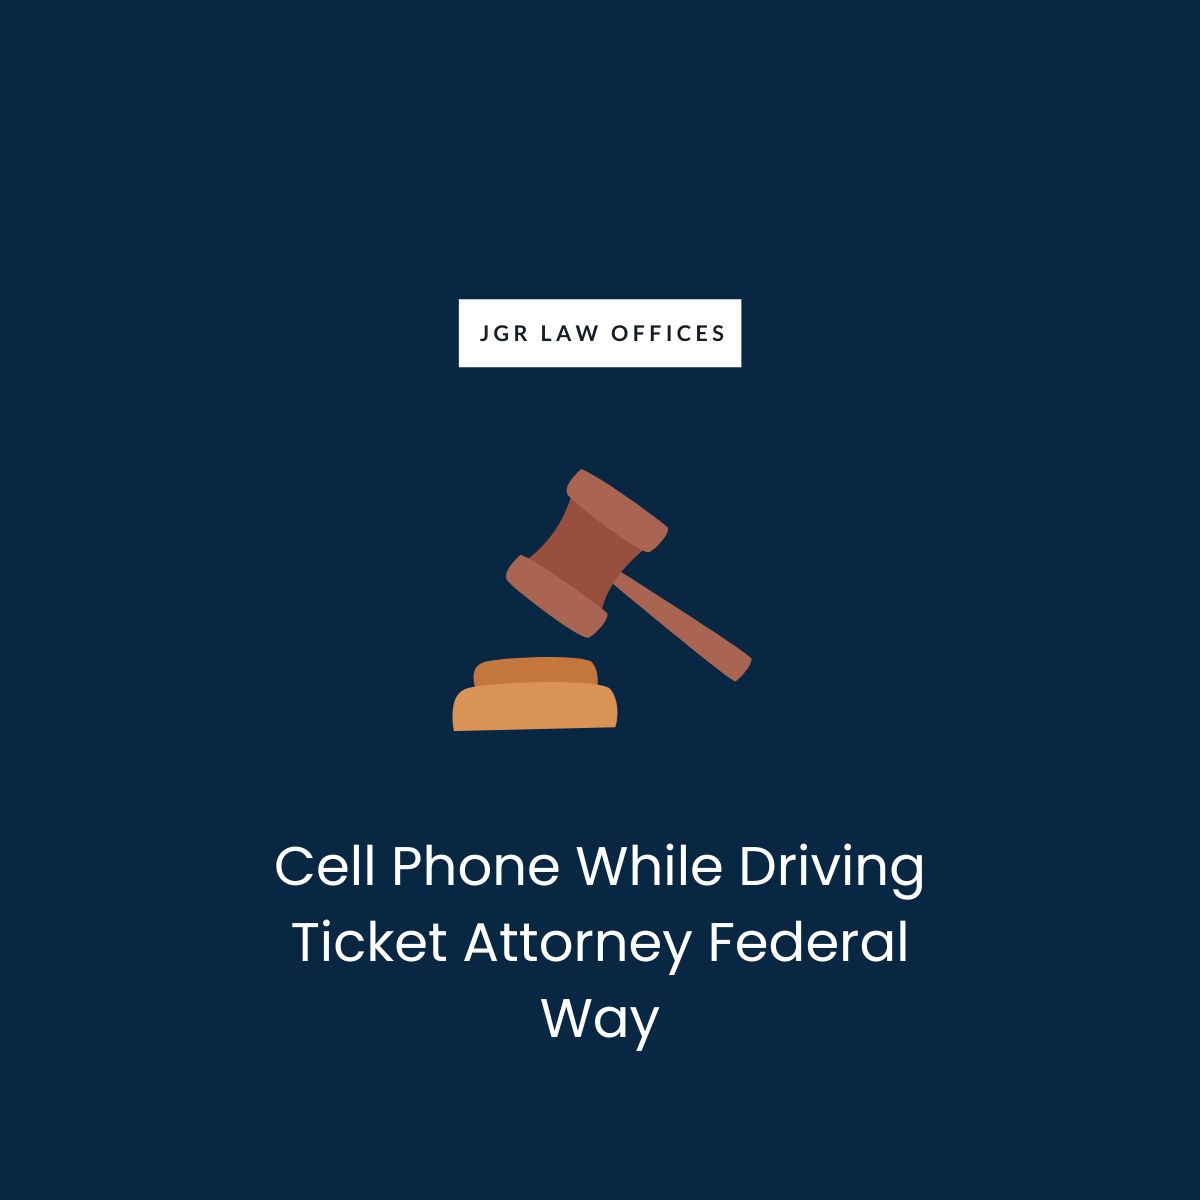 Cell Phone While Driving Ticket Attorney Federal Way